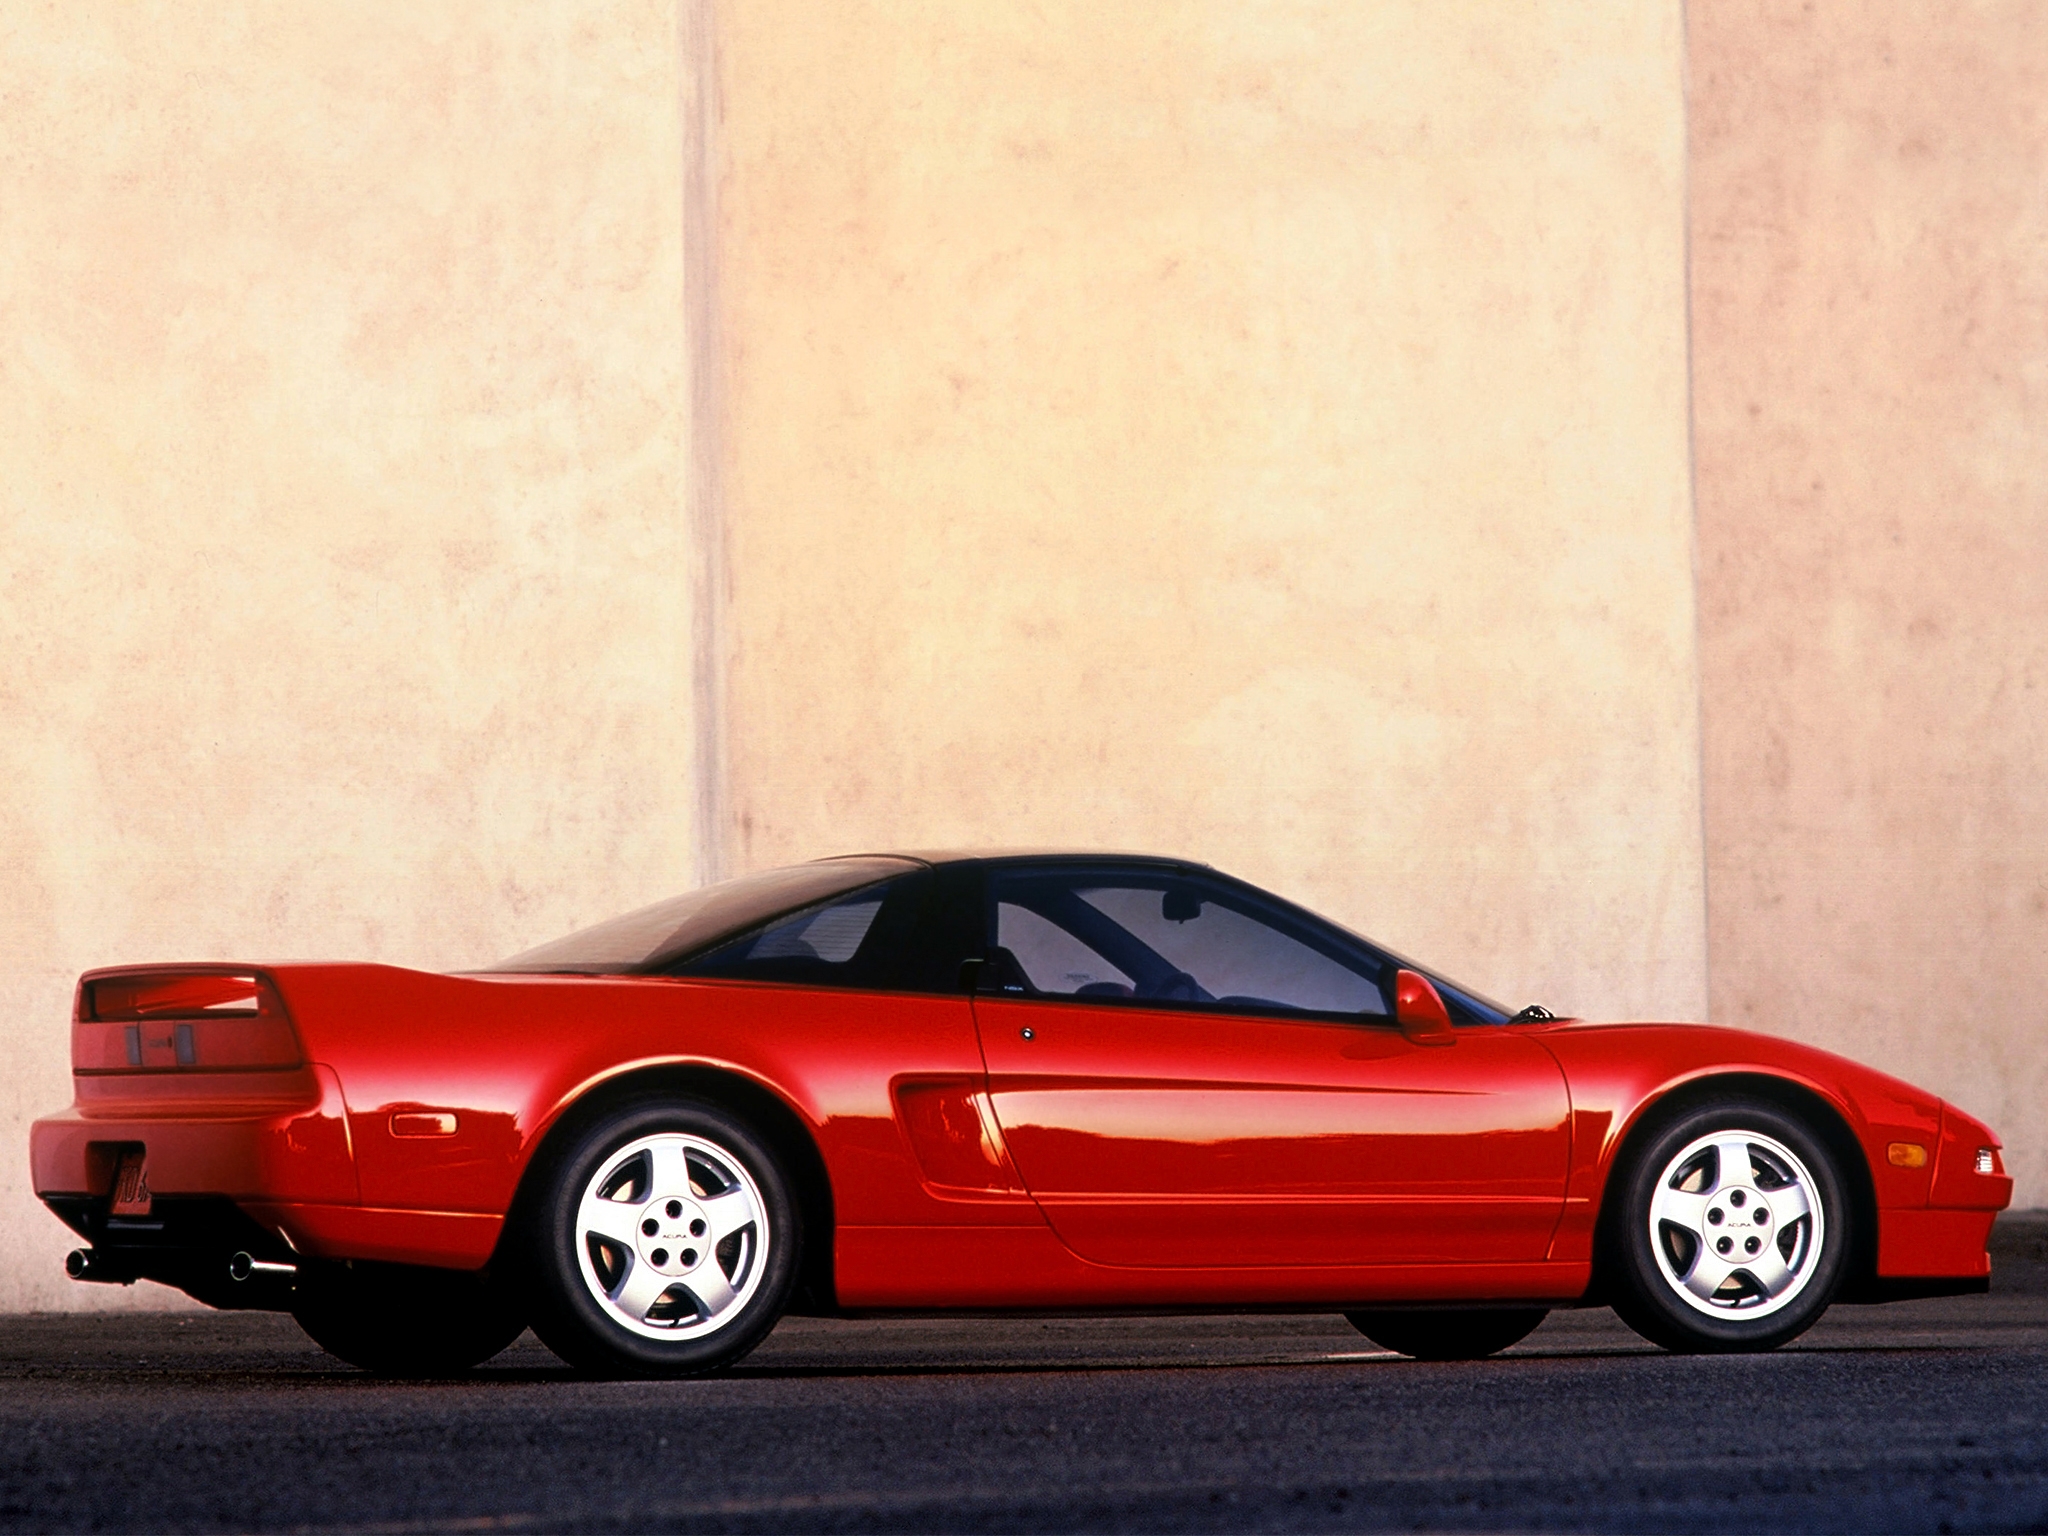 sports, auto, acura, cars, red, side view, style, akura, nsx, hsx, nsh